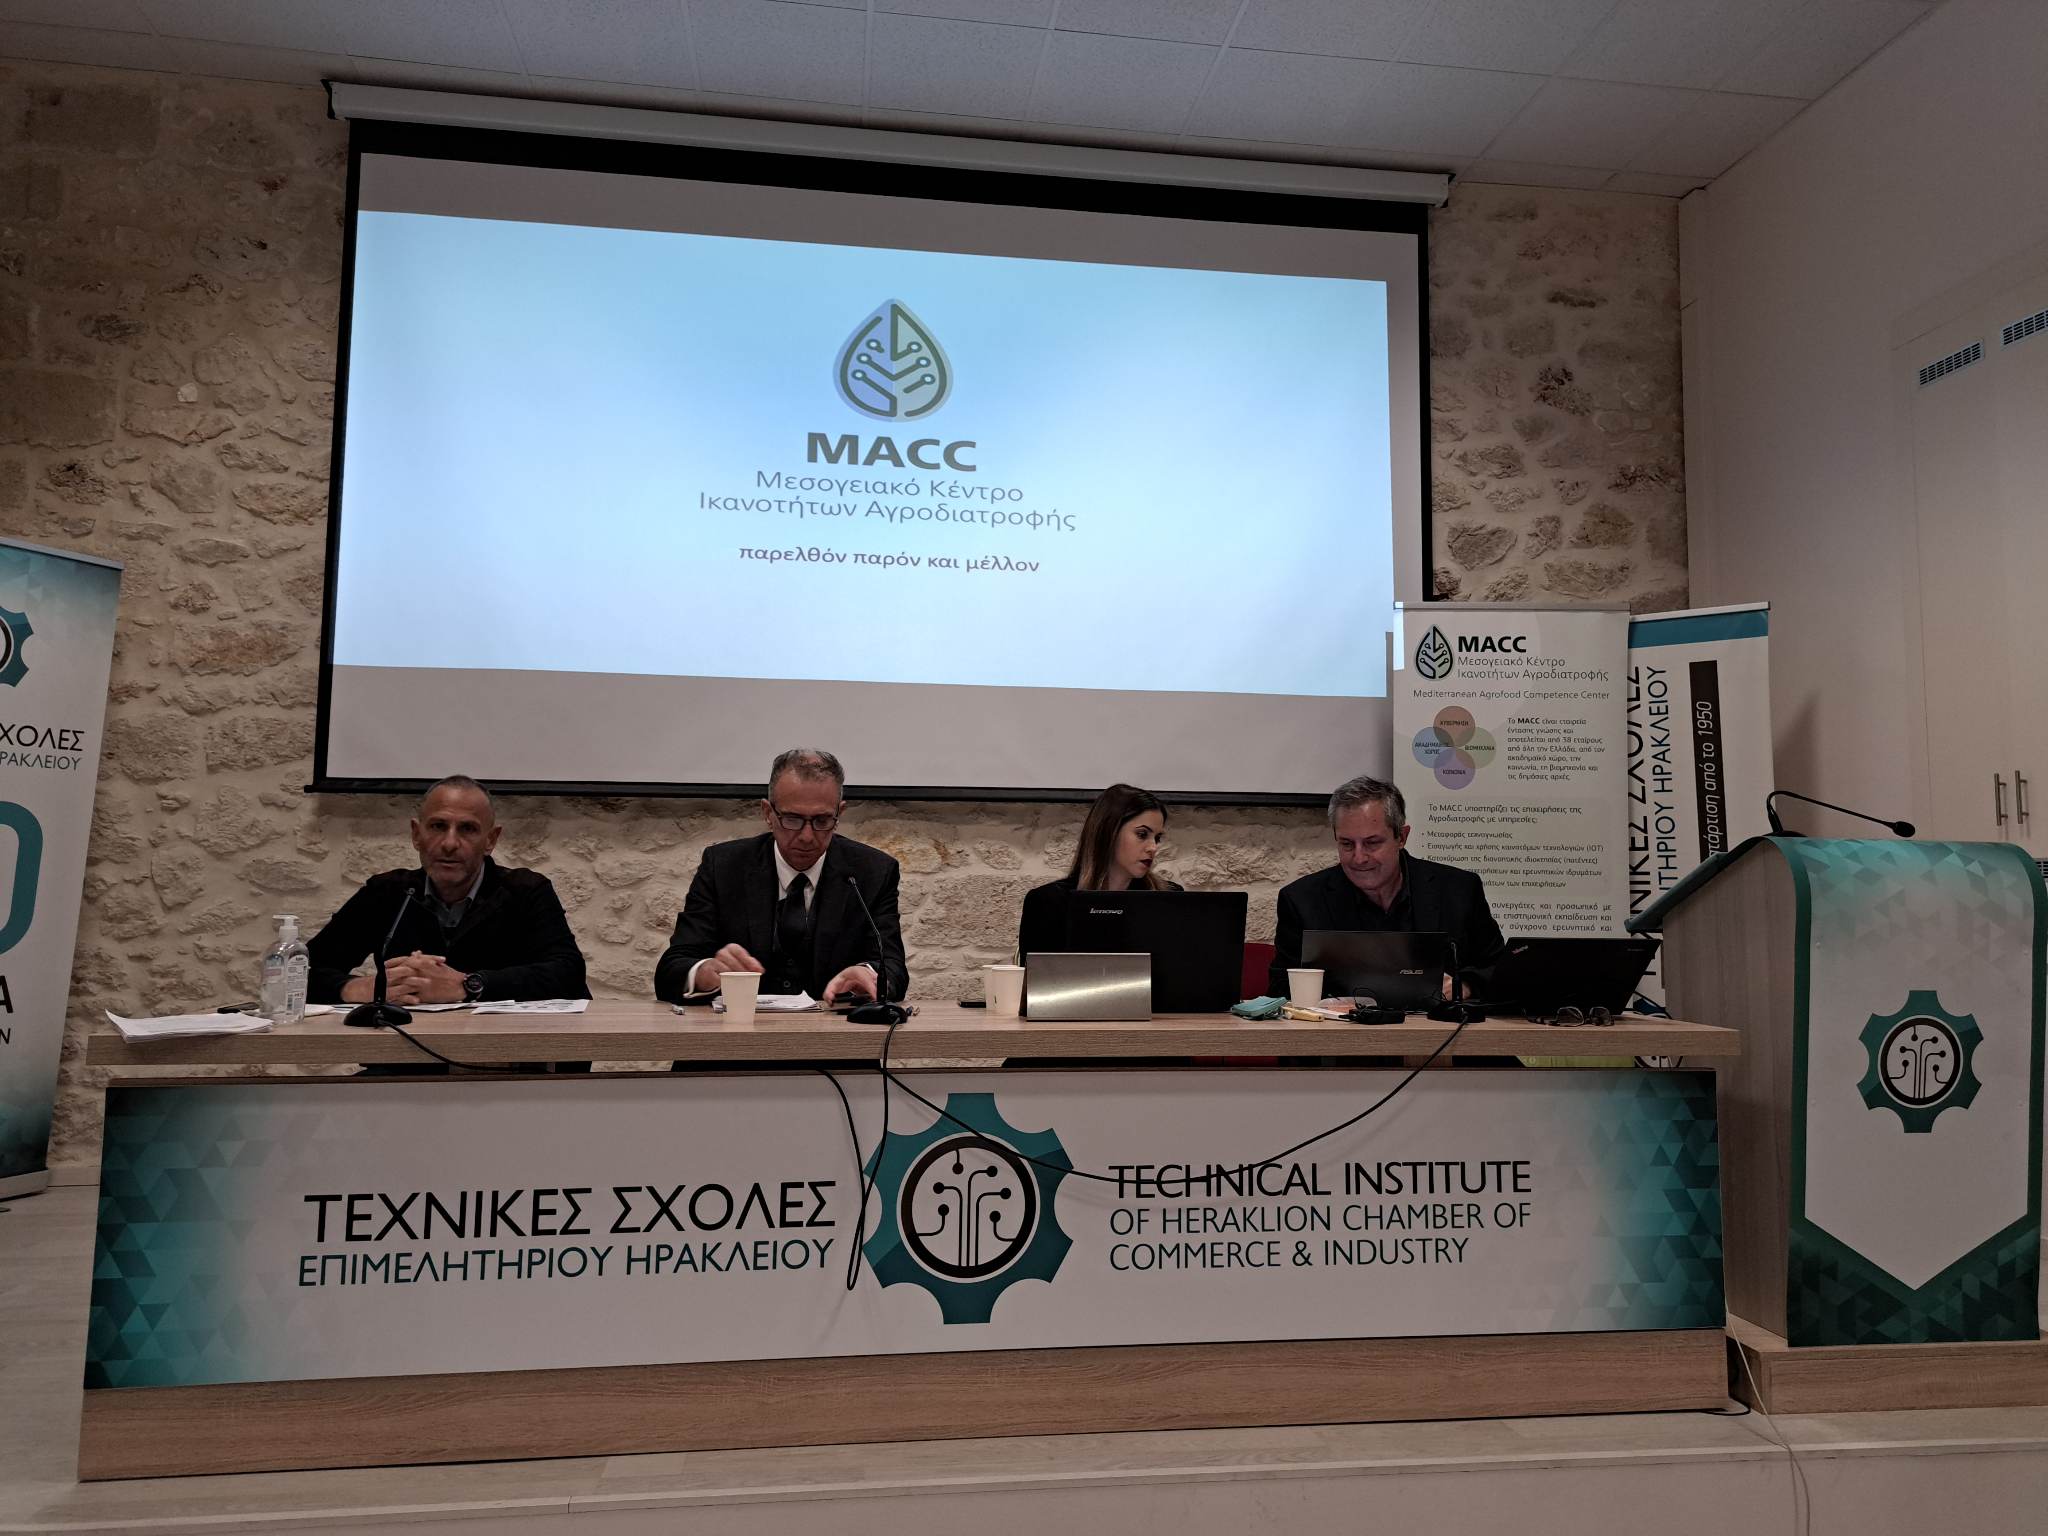 The Mediterranean Agrofood Competence Center (MACC), from Heraklion Crete, innovates on the threshold of 2023